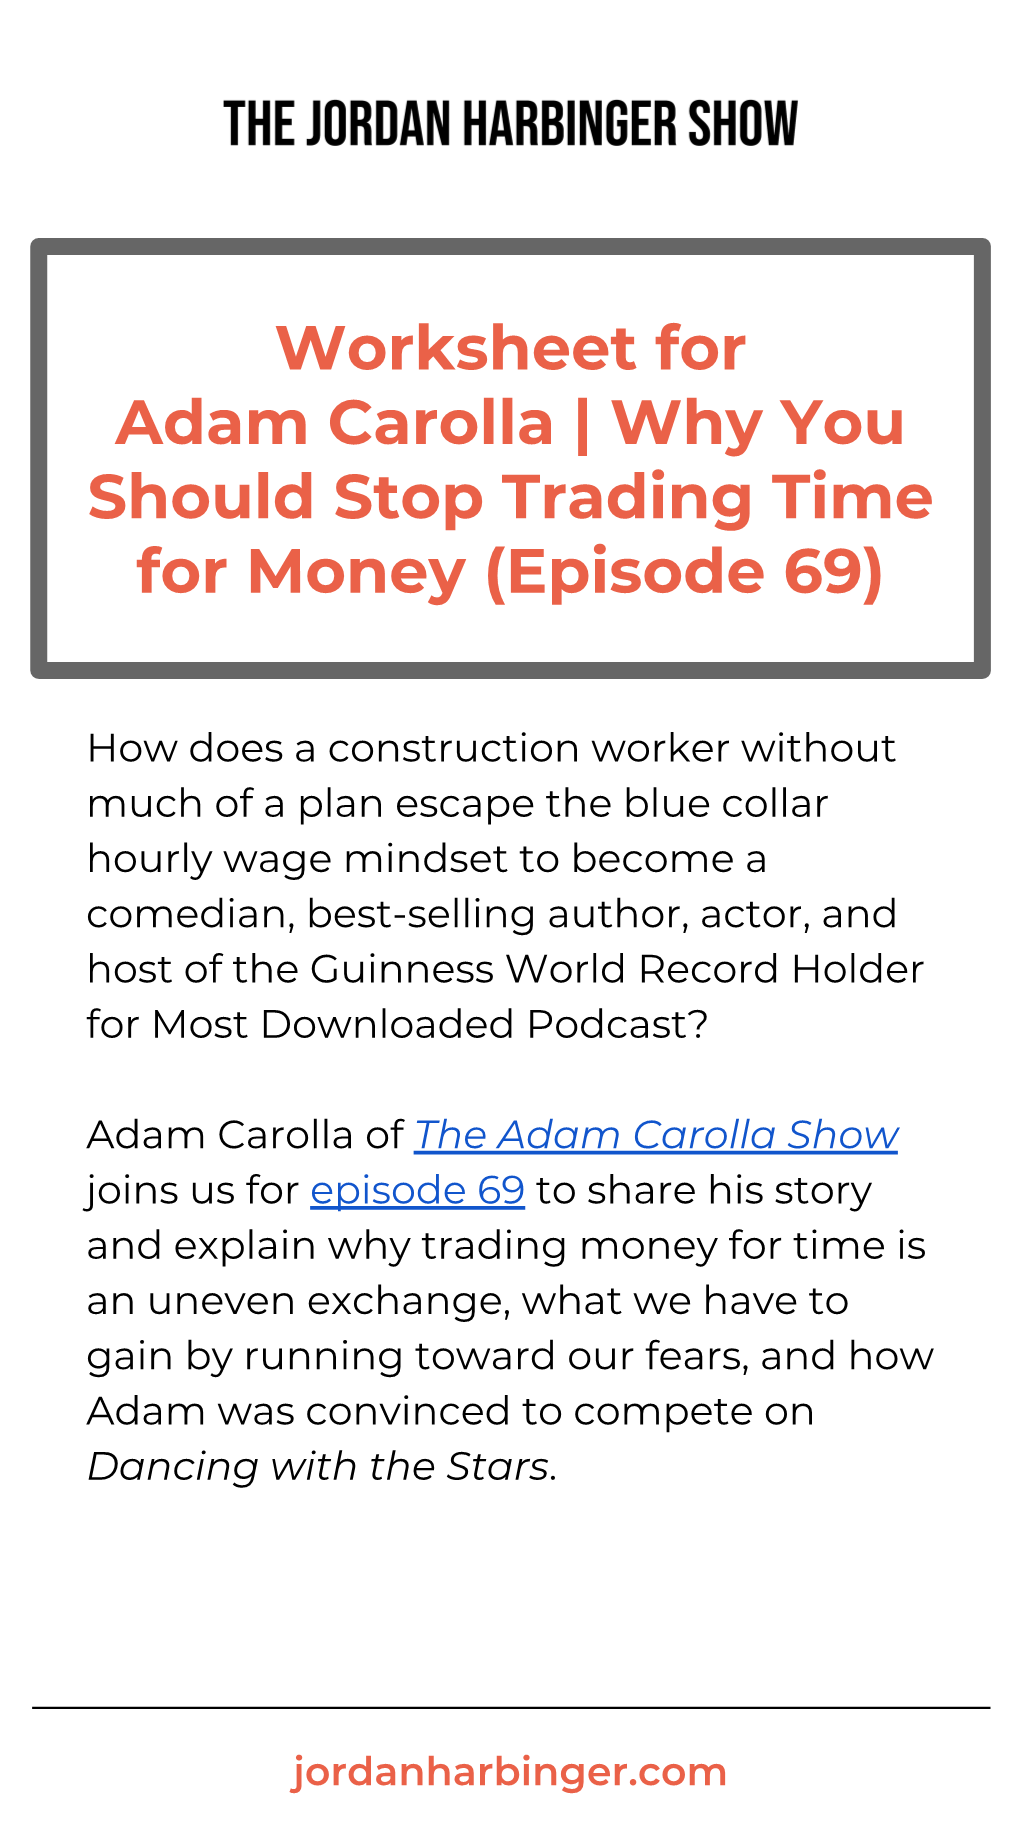 Worksheet for Adam Carolla | Why You Should Stop Trading Time for Money (Episode 69)